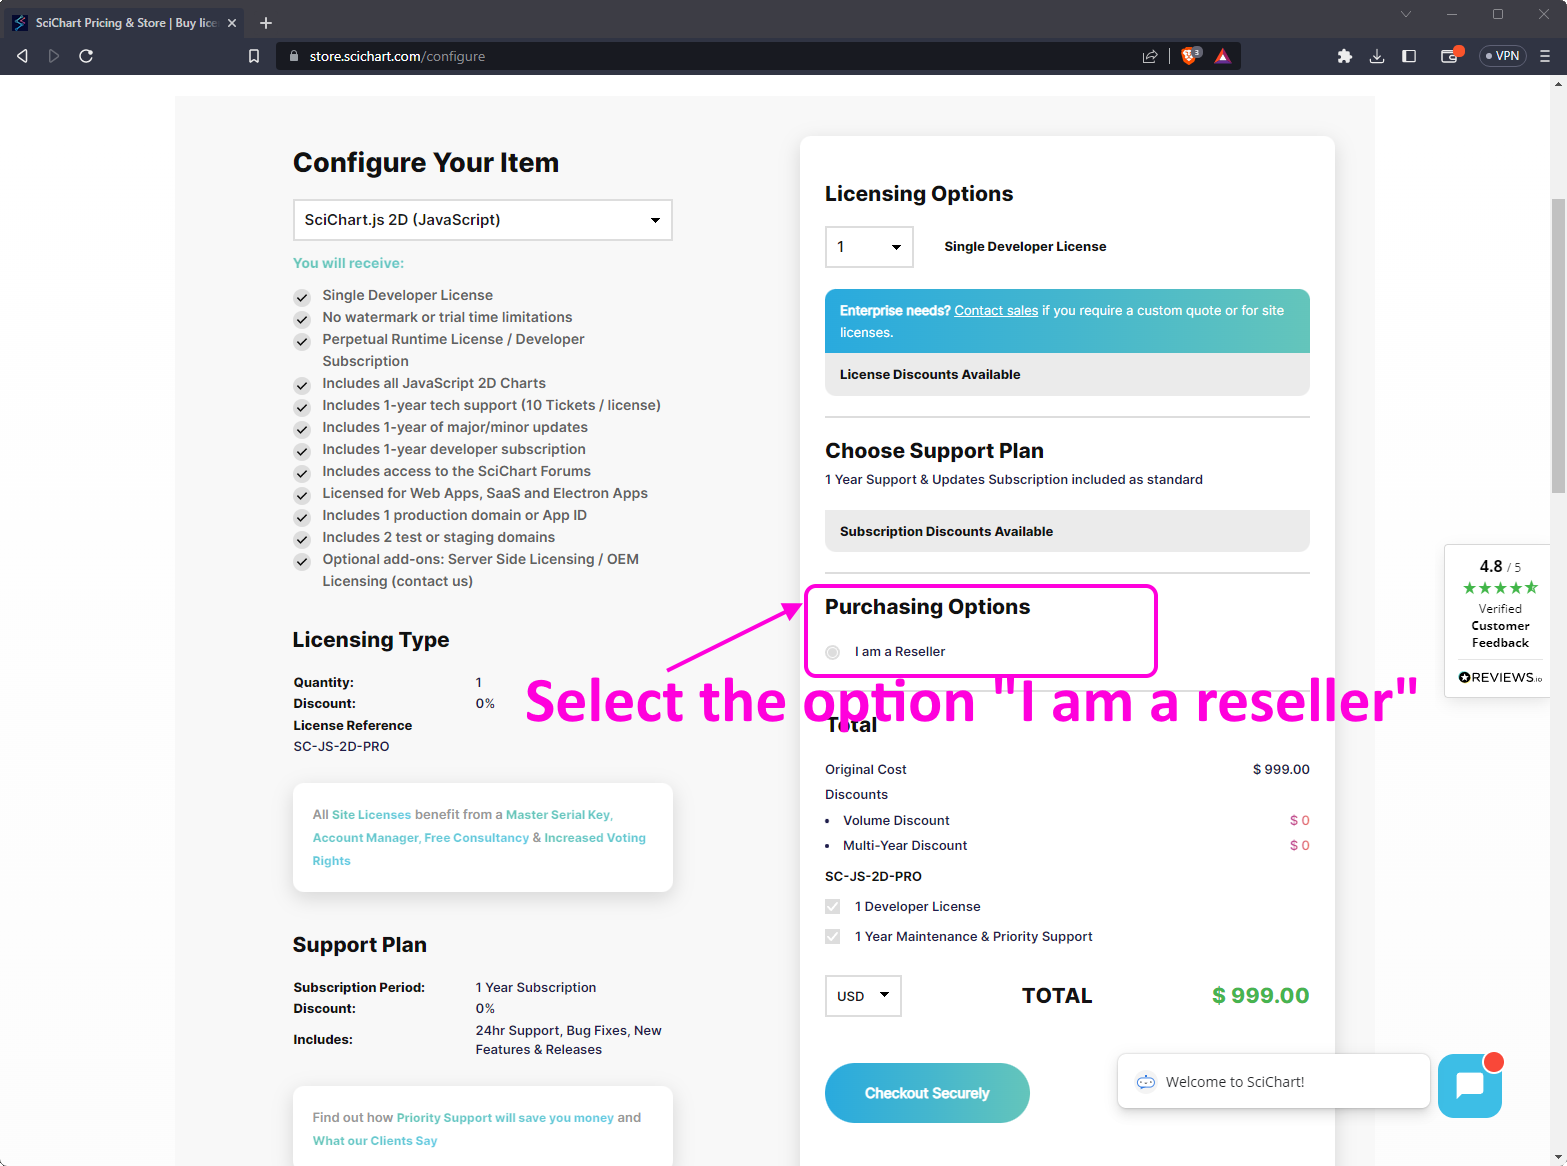 How to enable Reseller Options in our store